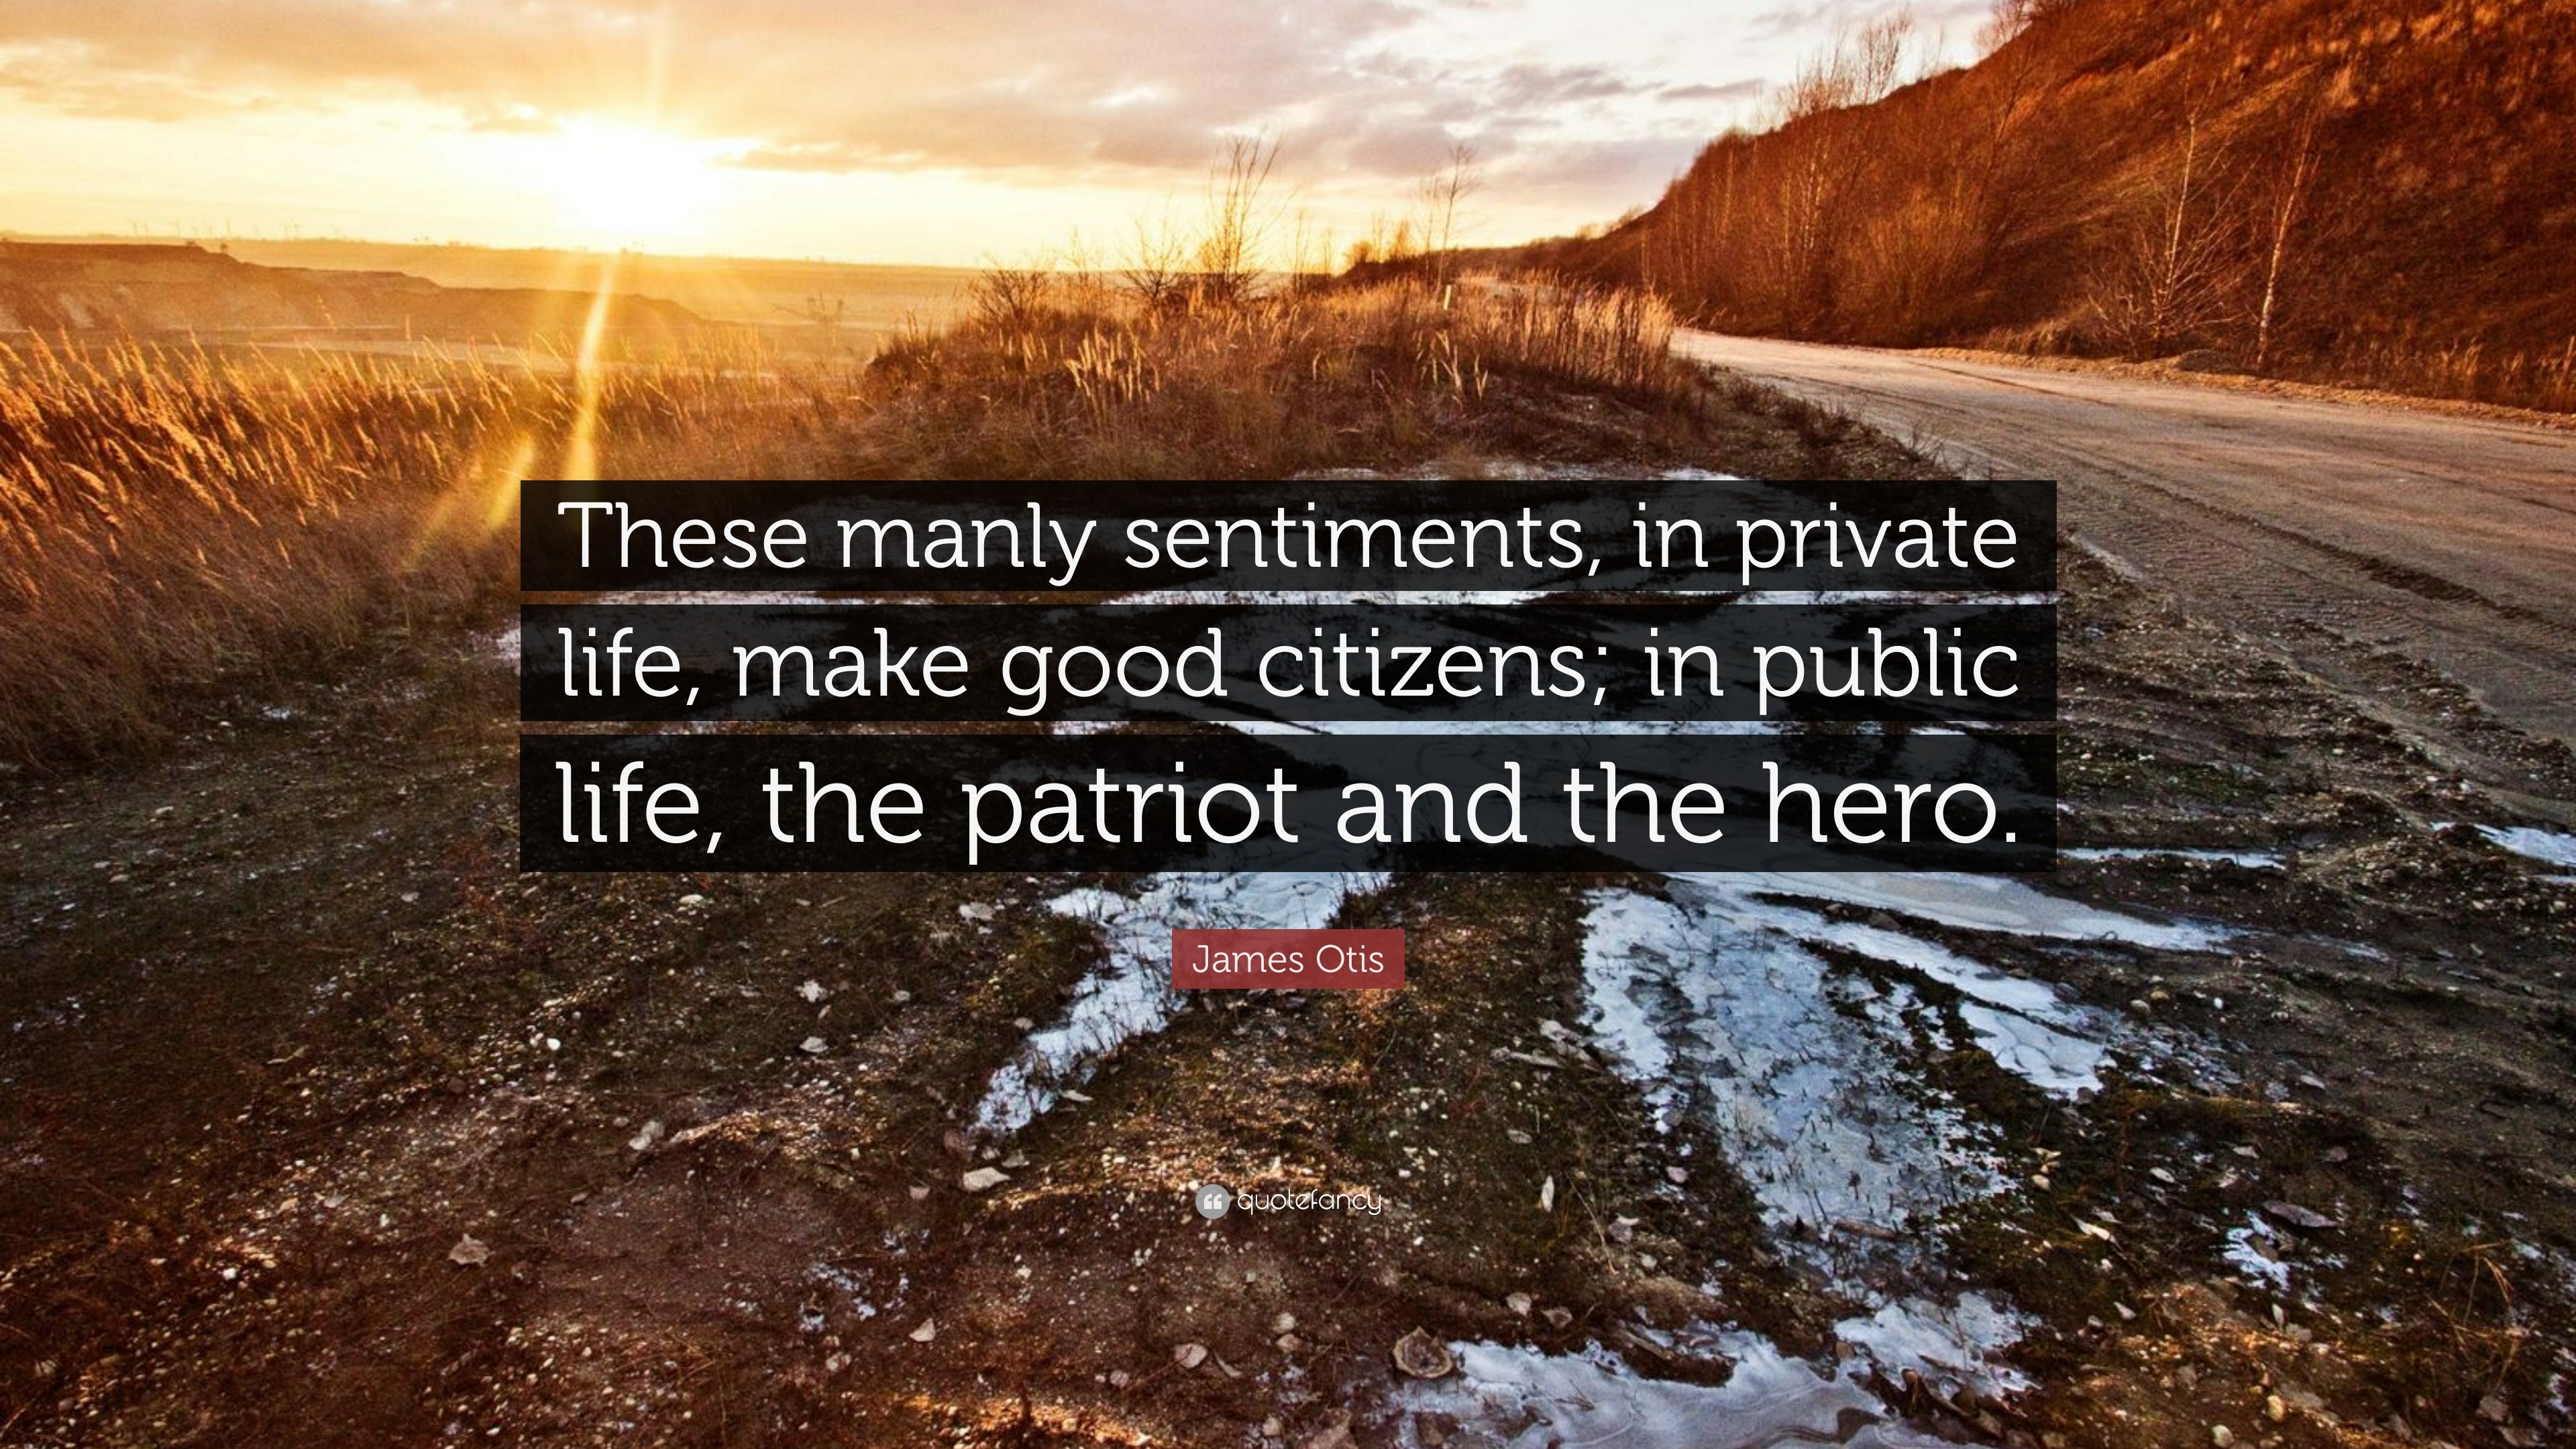 James Otis Quote “These manly sentiments in private life make good citizens